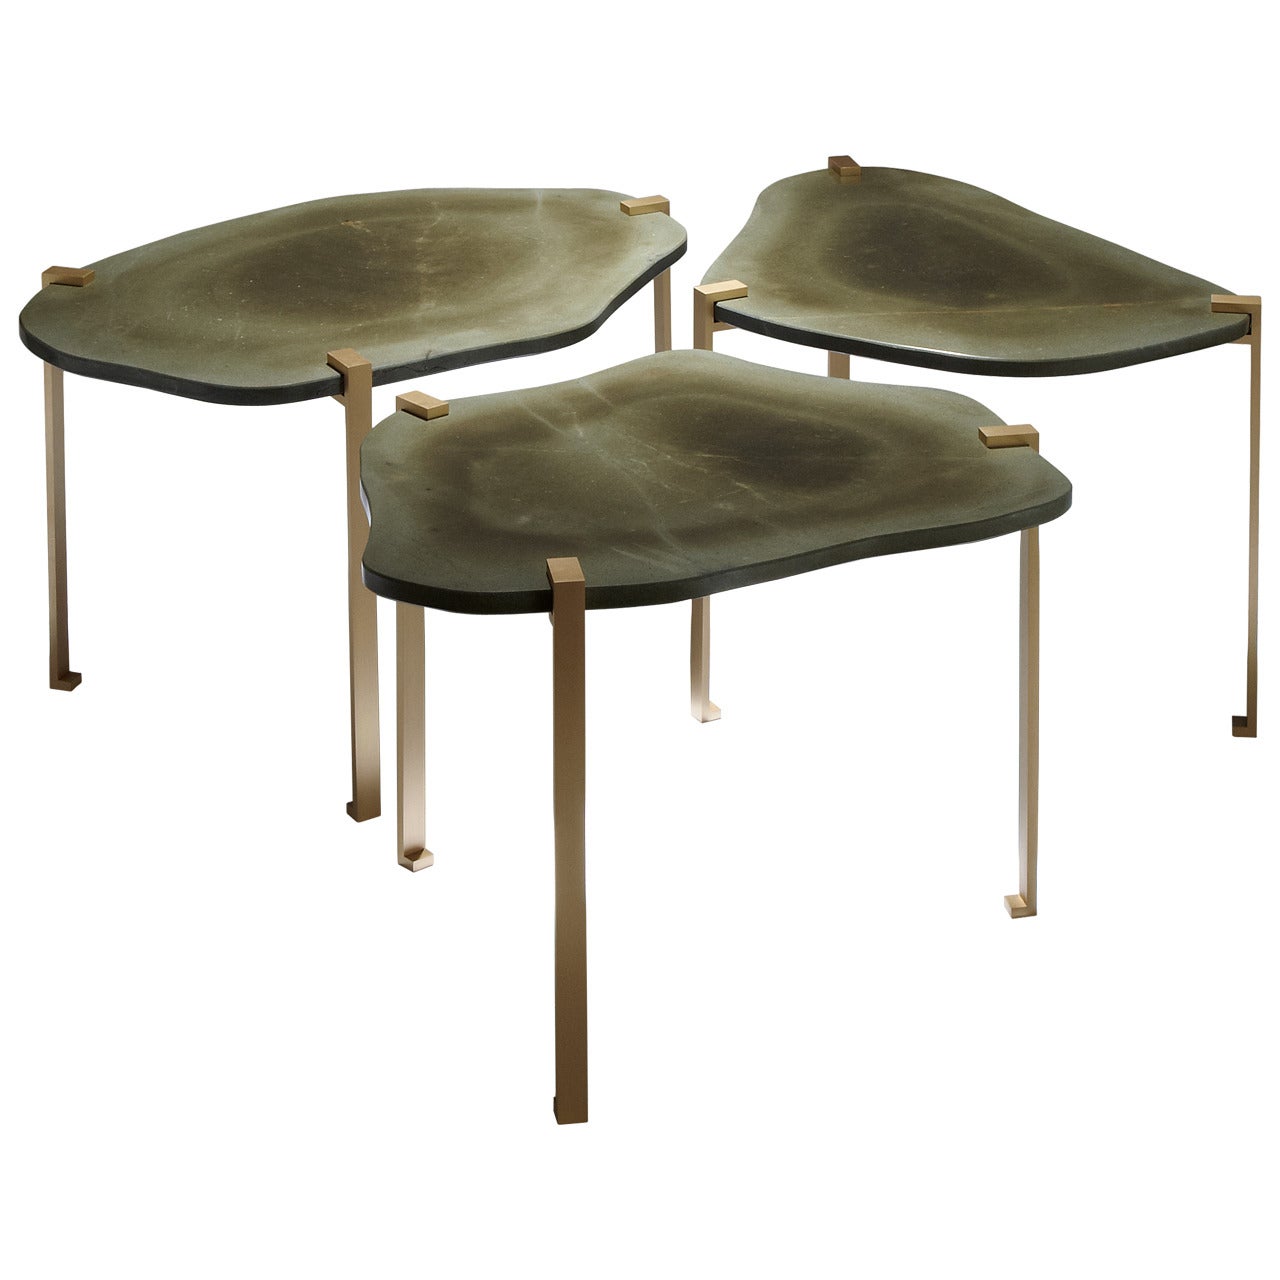 Side Tables "Turtle" by Hervé Langlais, Galerie Negropontes